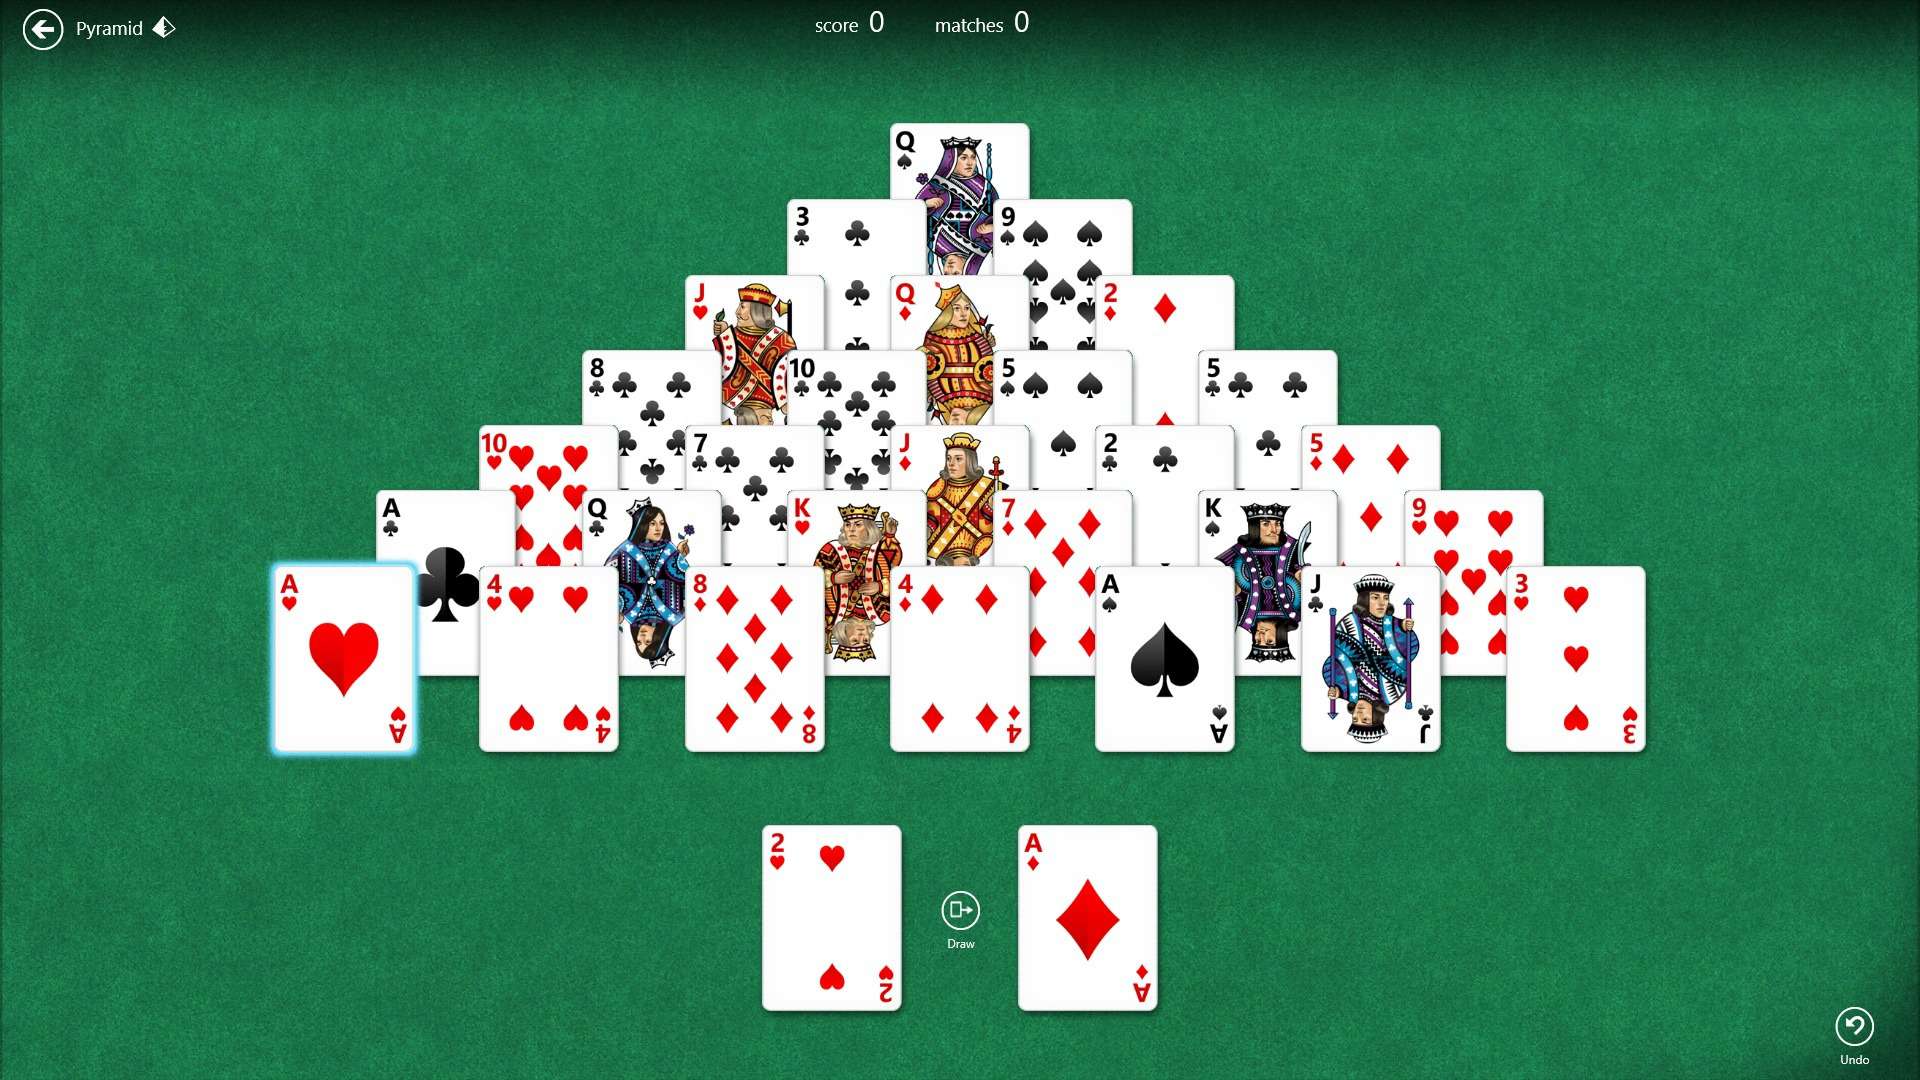 i want the simple, windows 7 solitaire only